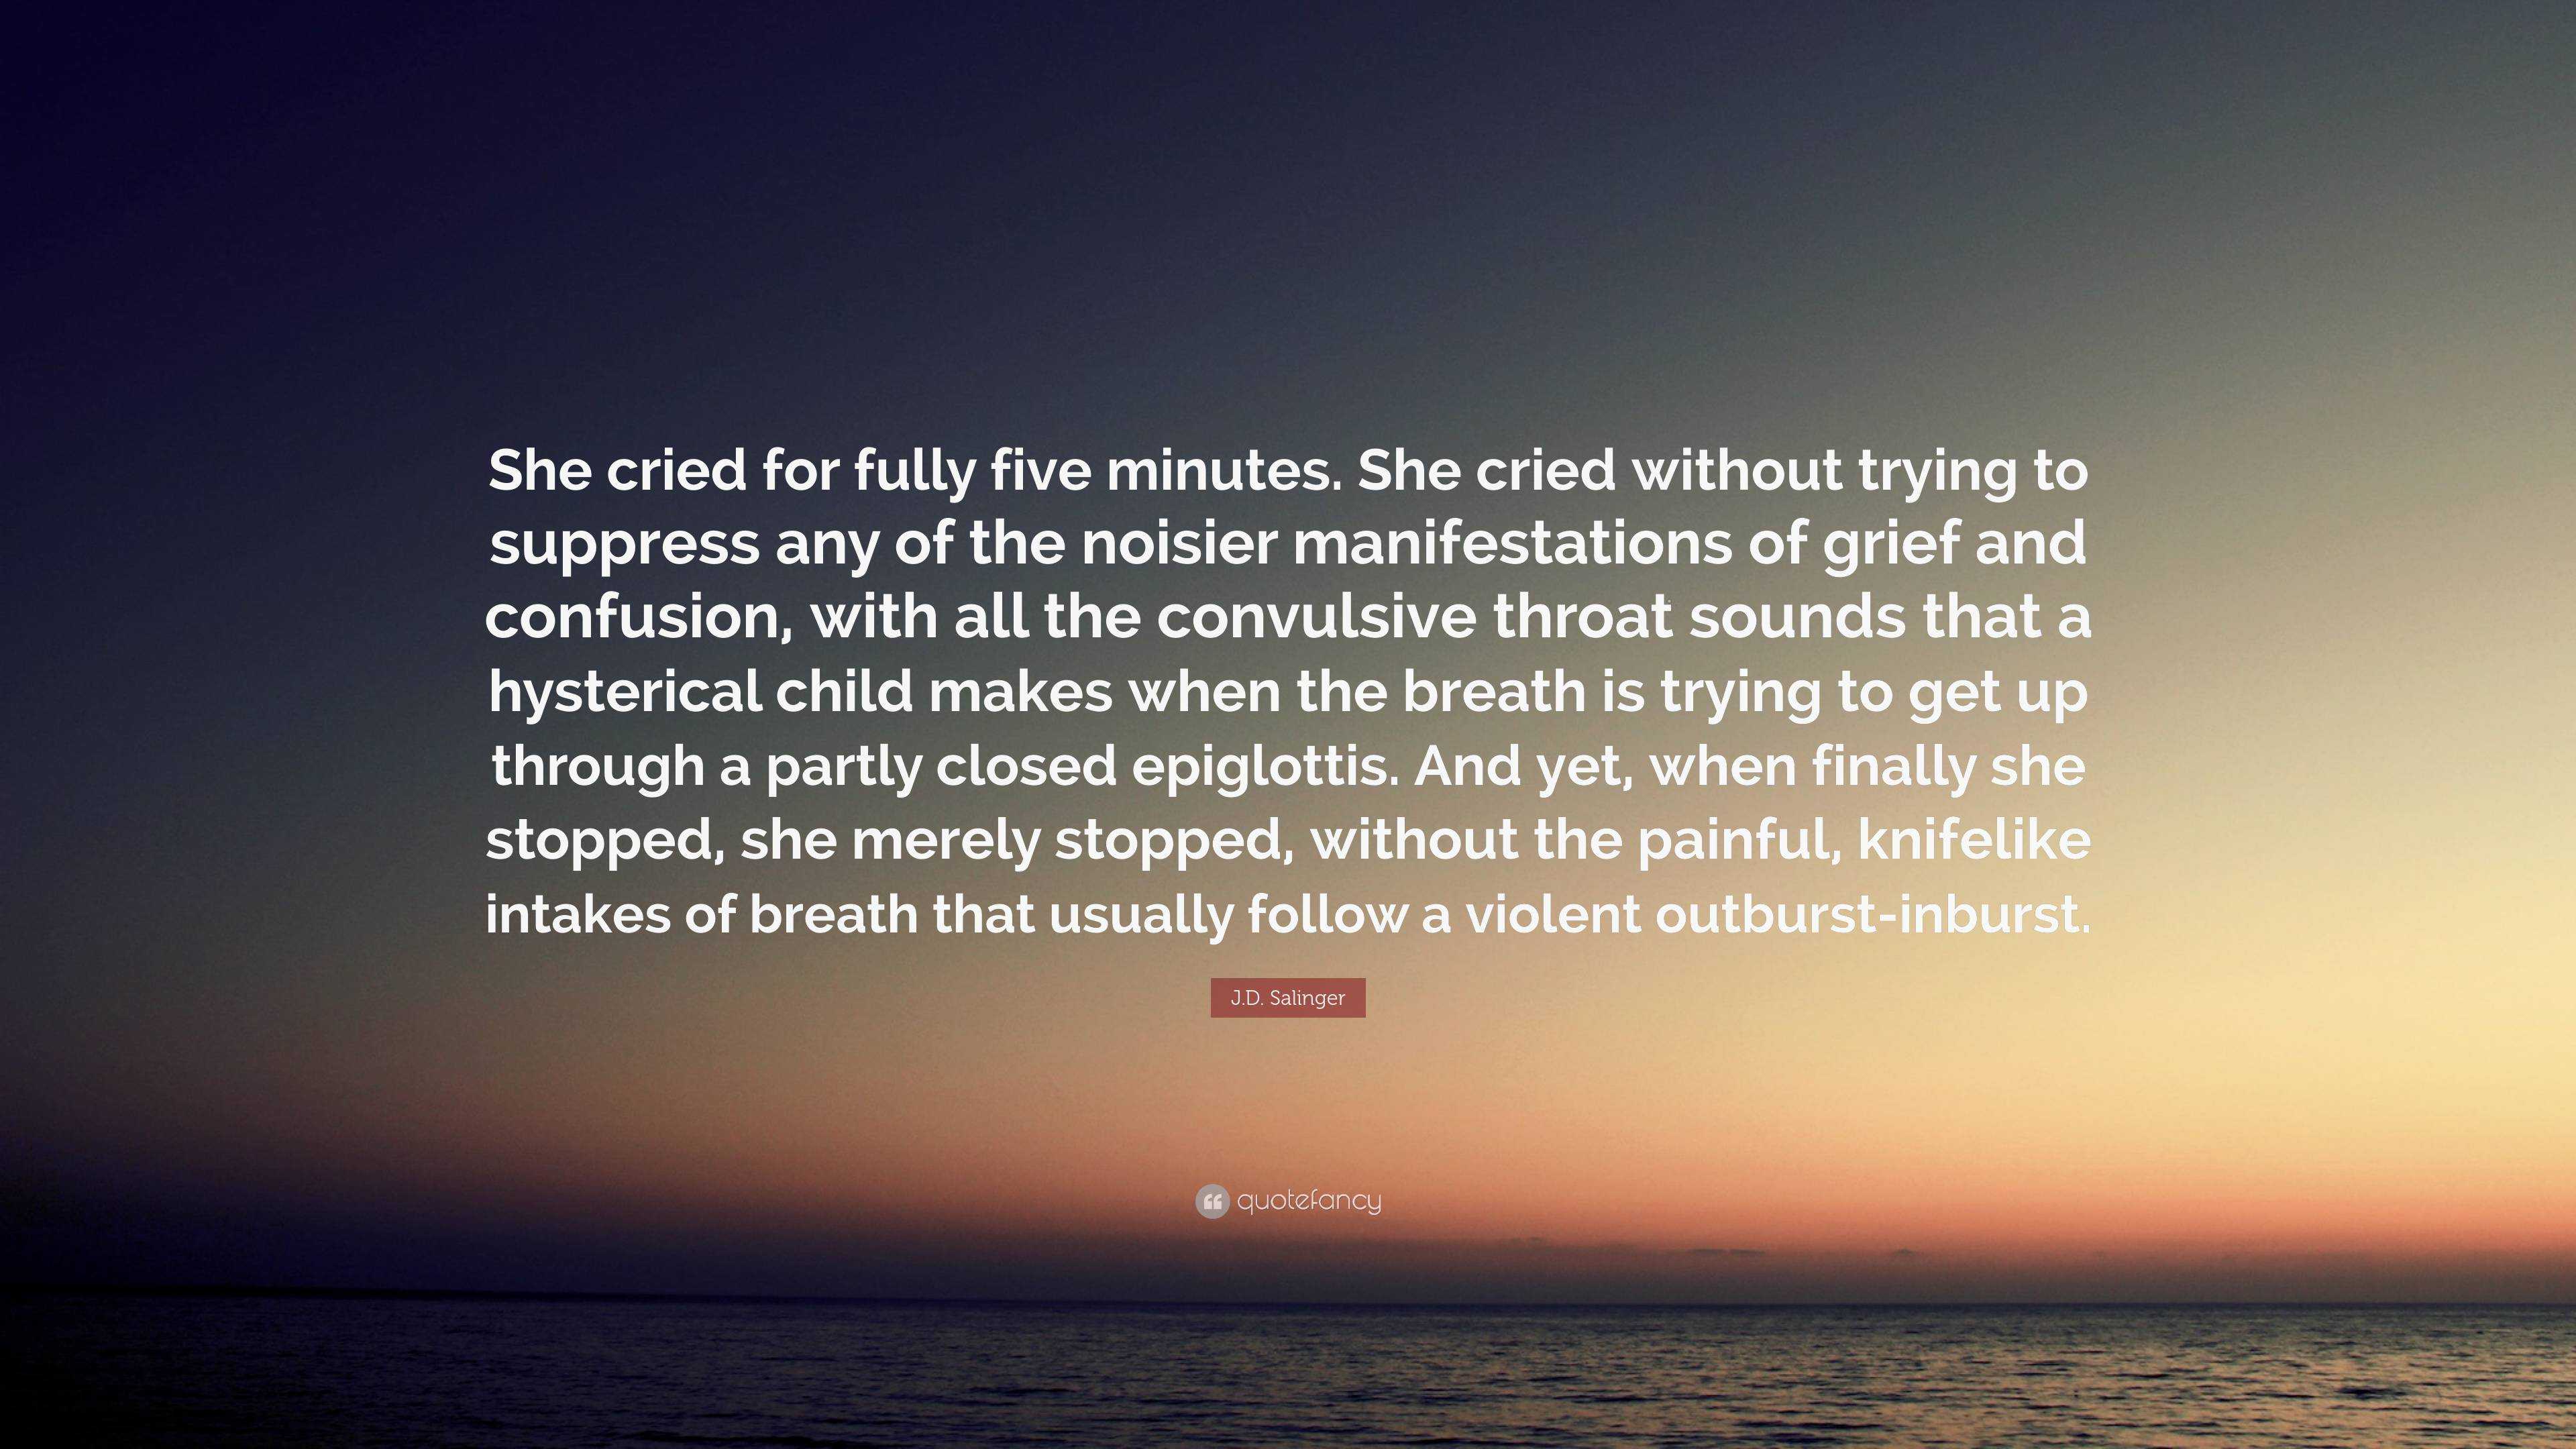 J.D. Salinger Quote: “She cried for fully five minutes. She cried ...